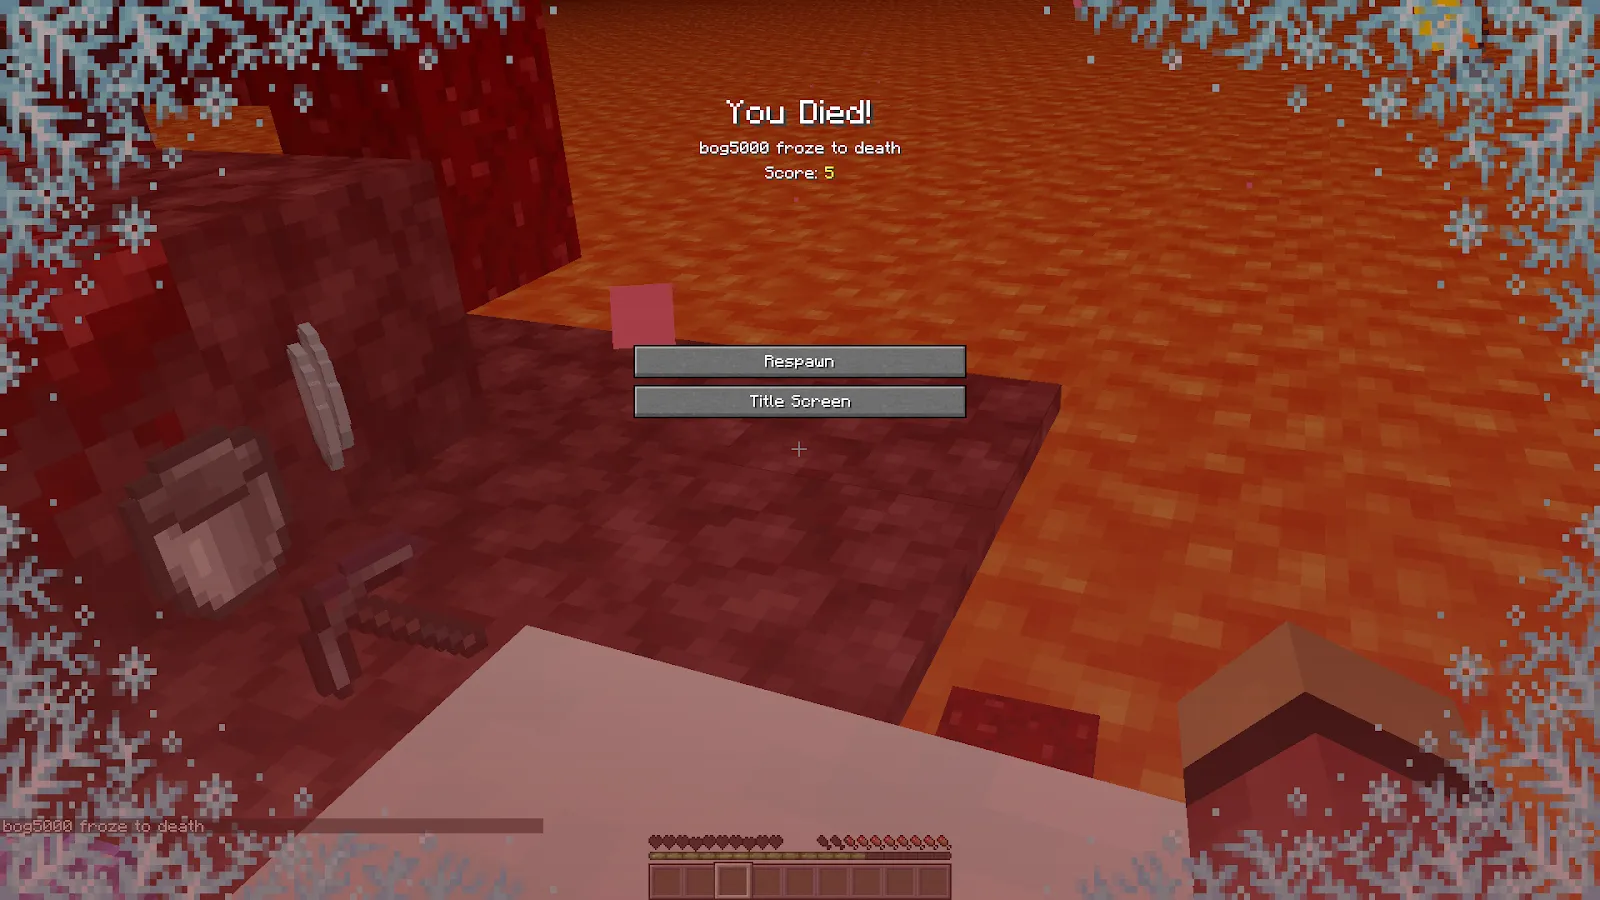 Image of the death screen in Minecraft with items dropped